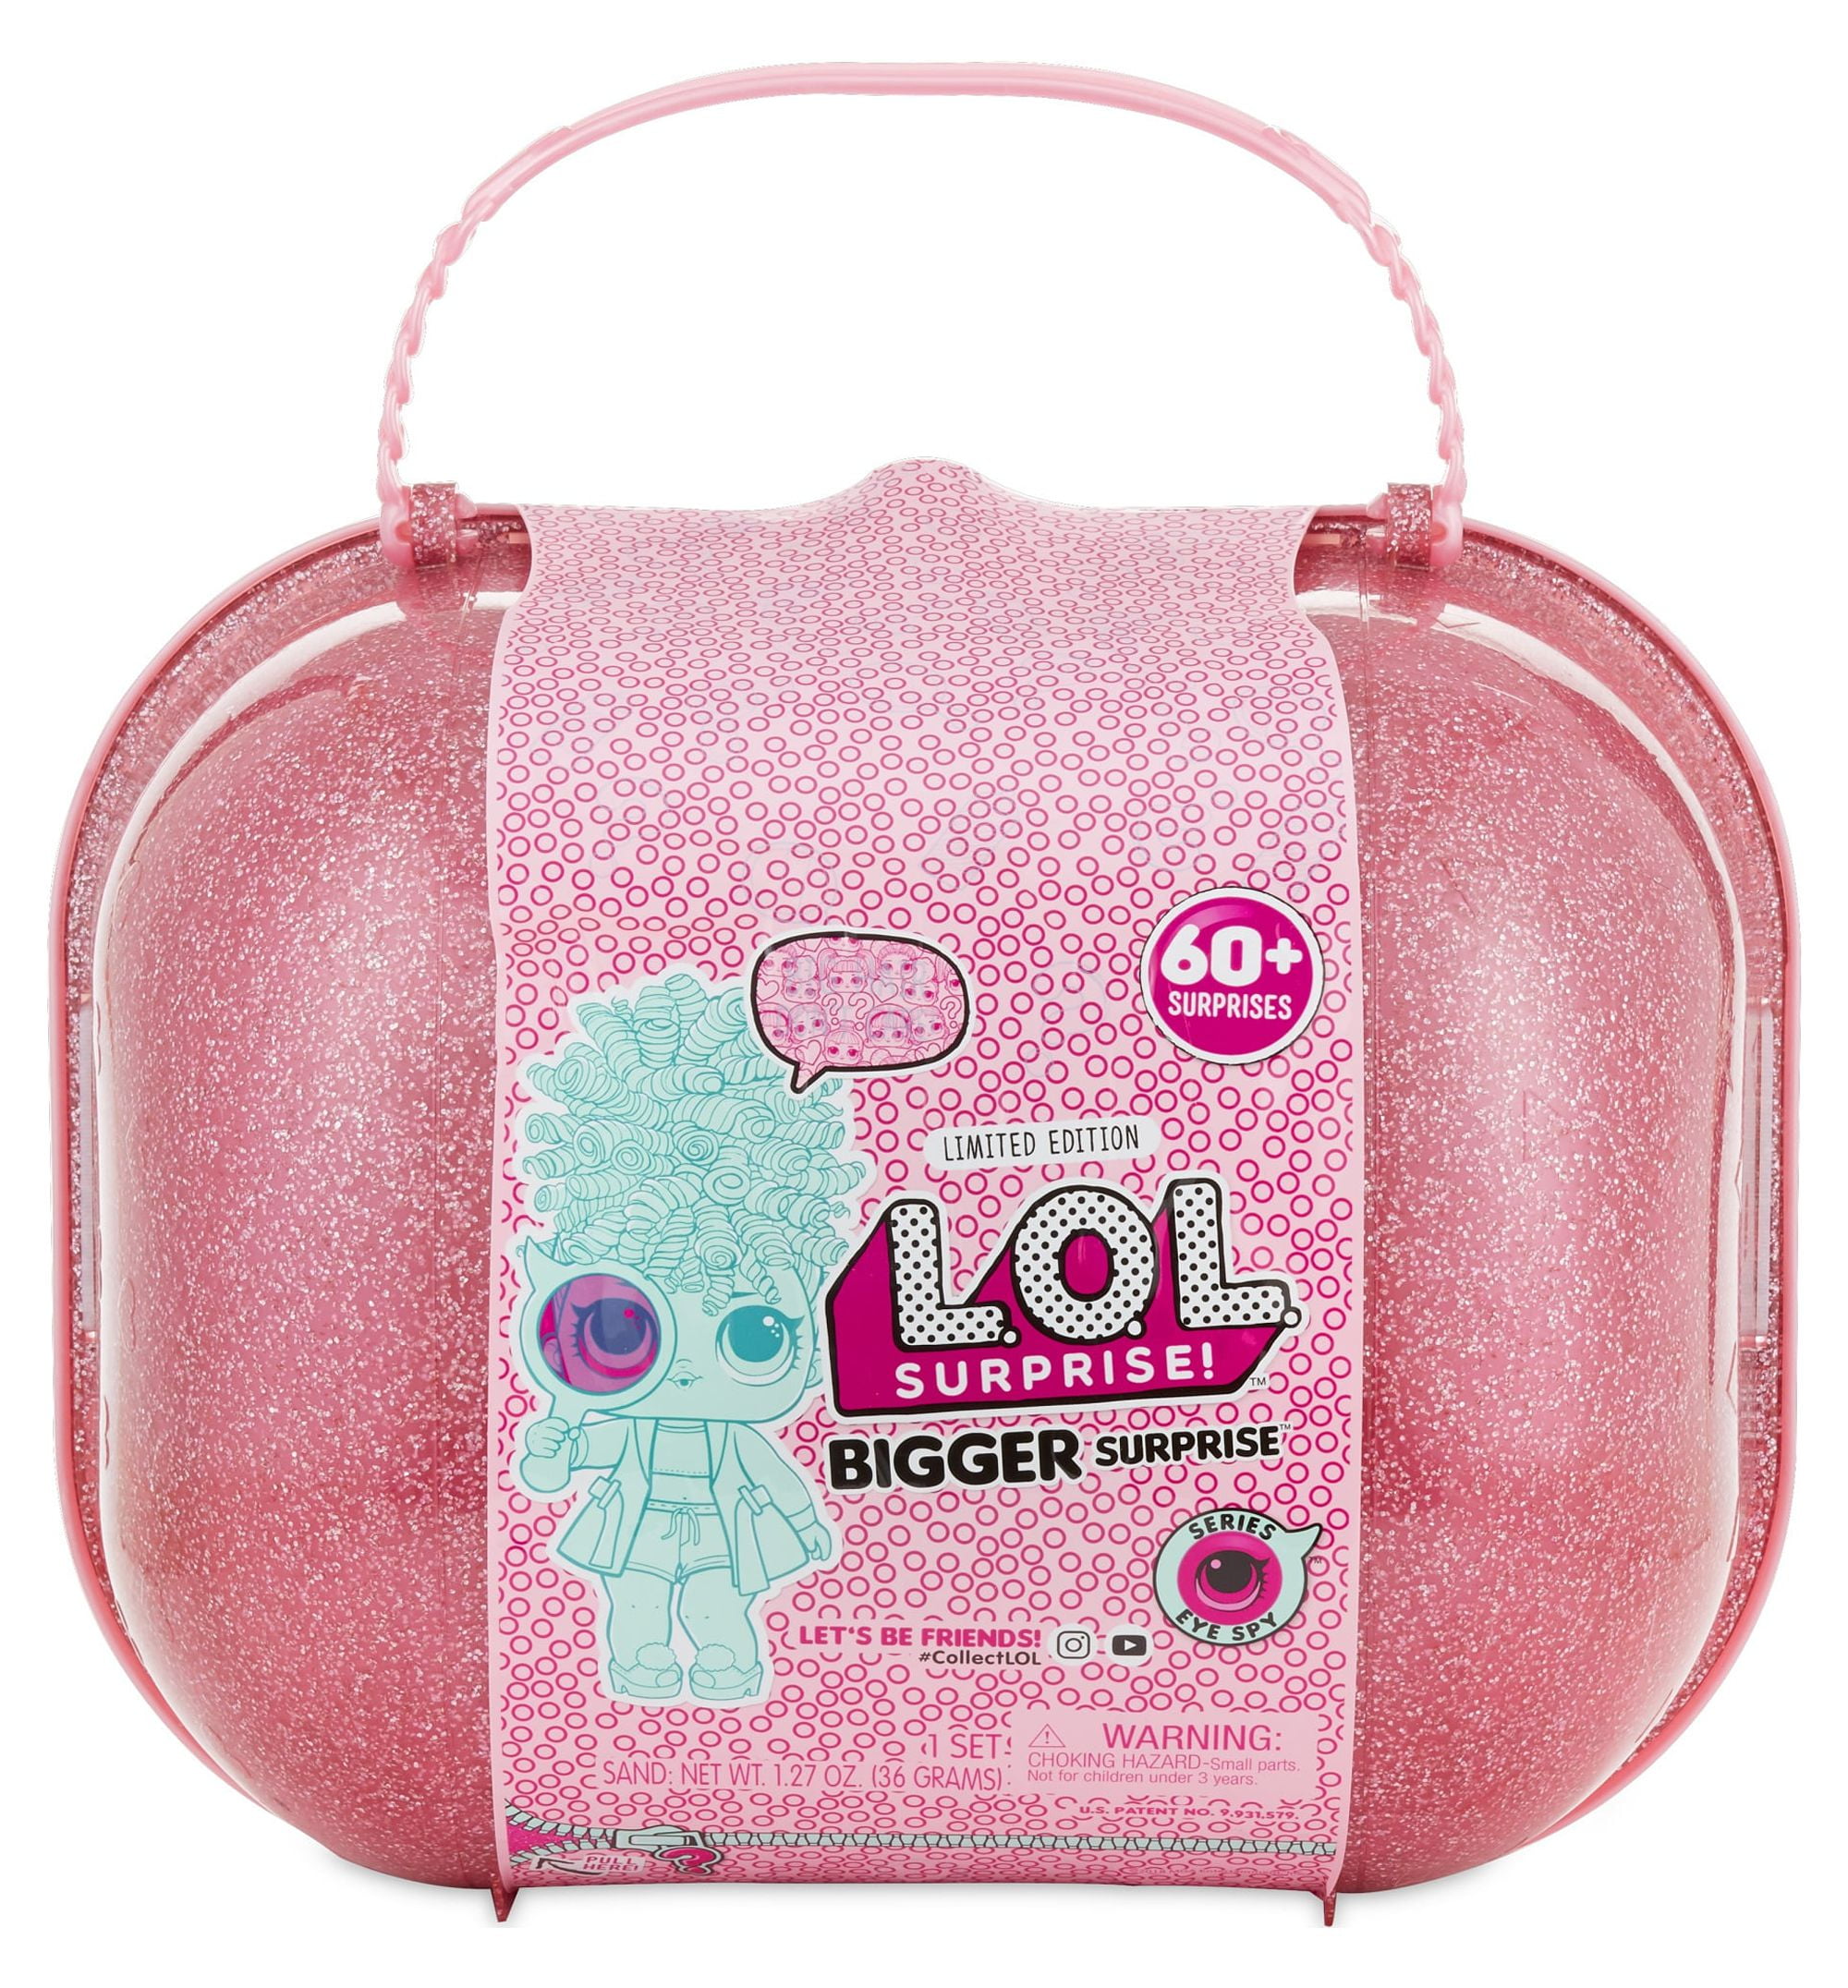 LOL Surprise Bigger Surprise Limited Edition 2 Dolls, 1 Pet, 1 Lil Sis with  60 Surprises, Ages 4 and up